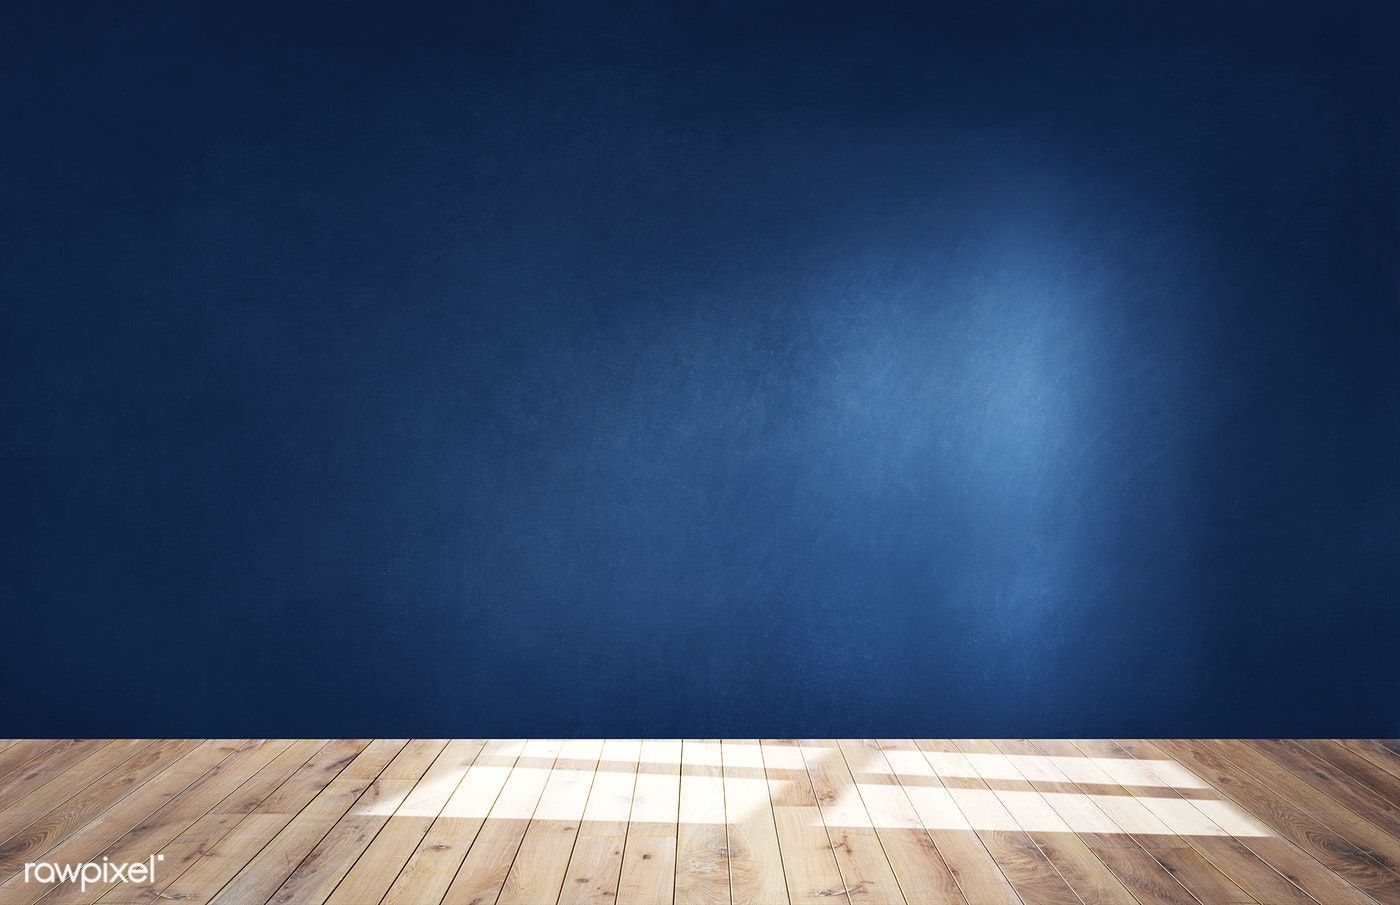 Download premium image of Dark blue wall in an empty room with a